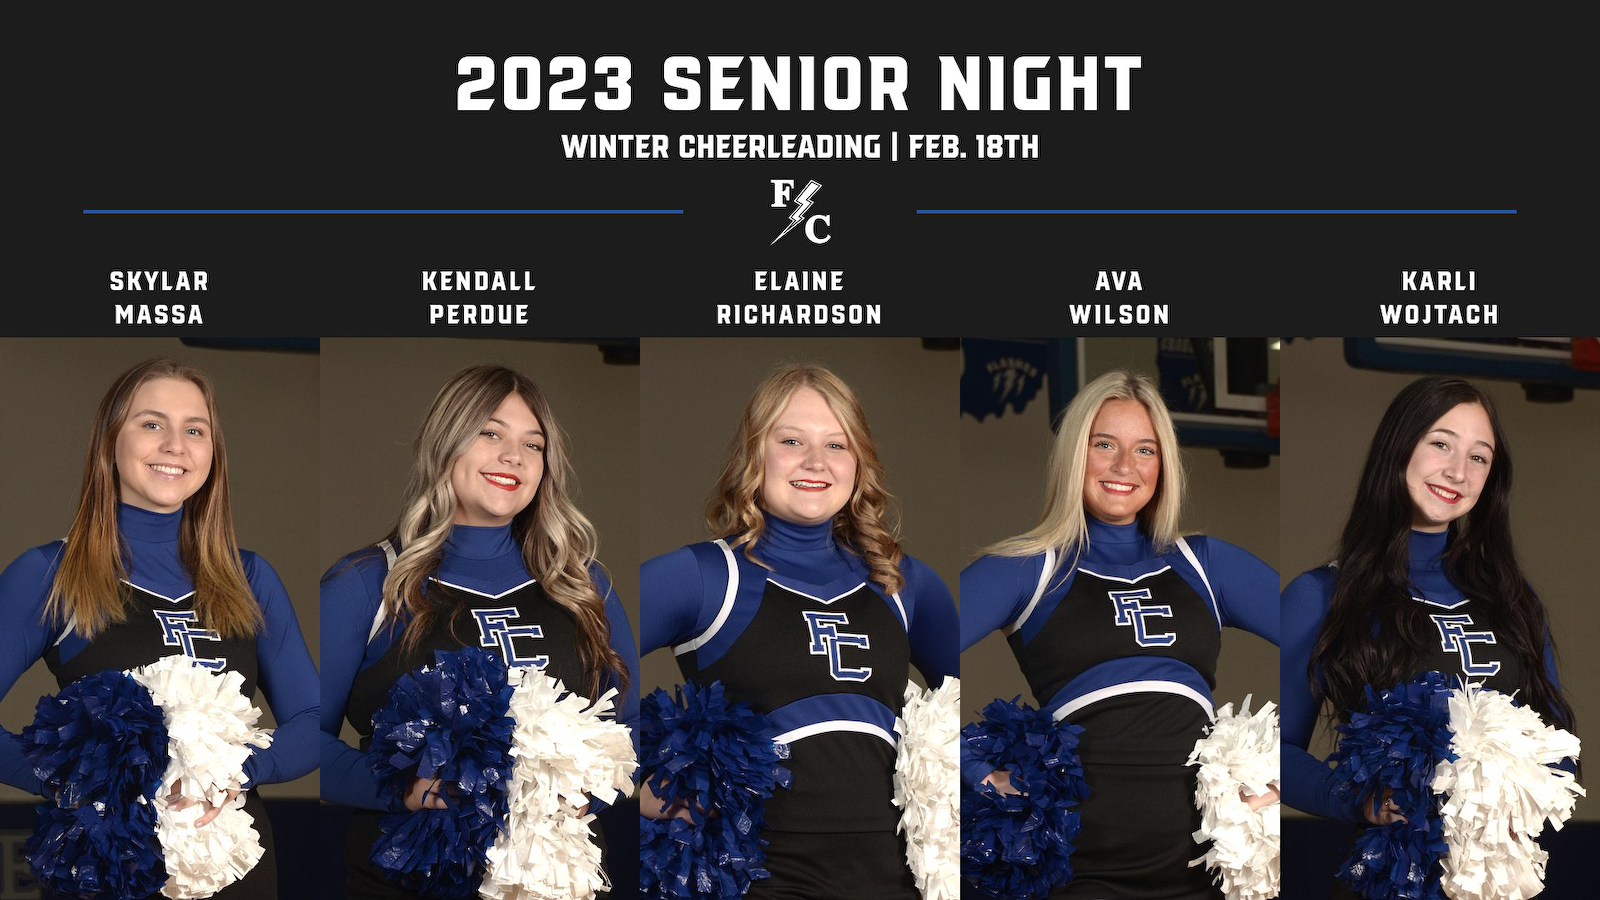 Boys Basketball, Cheerleading, Sparkle and Student Athletic Trainer Senior Night cover photo